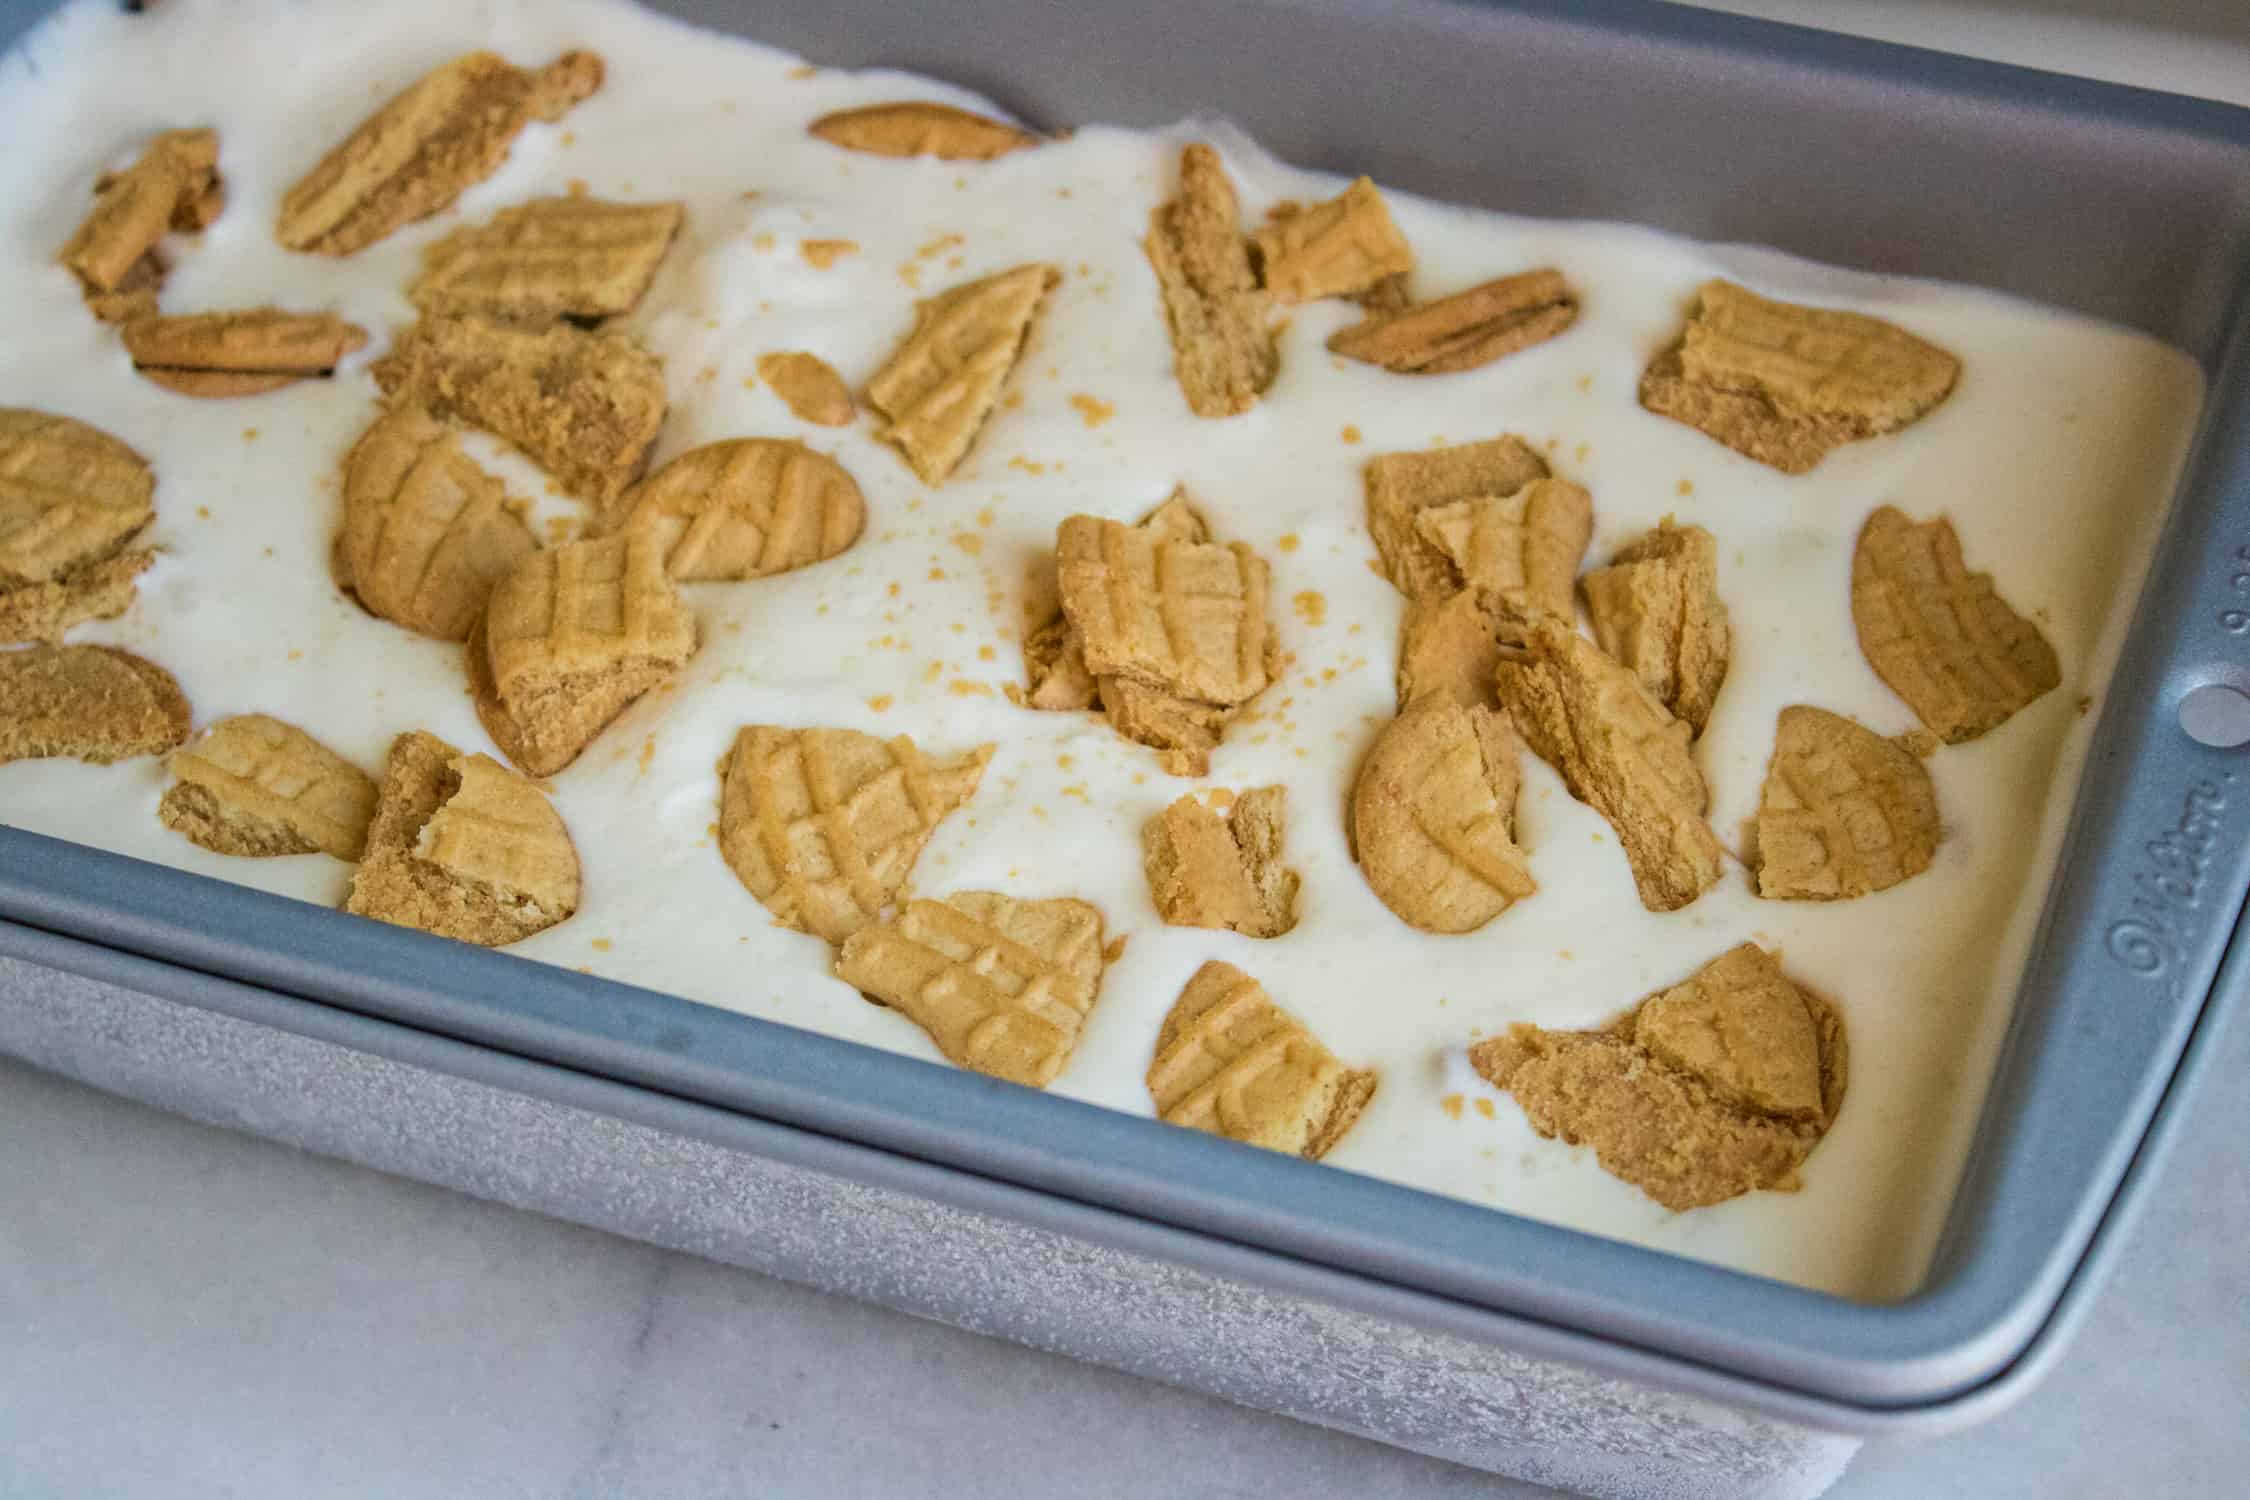 Nutter butter no churn ice cream in loaf pan with pieces of cookie on top before freezing